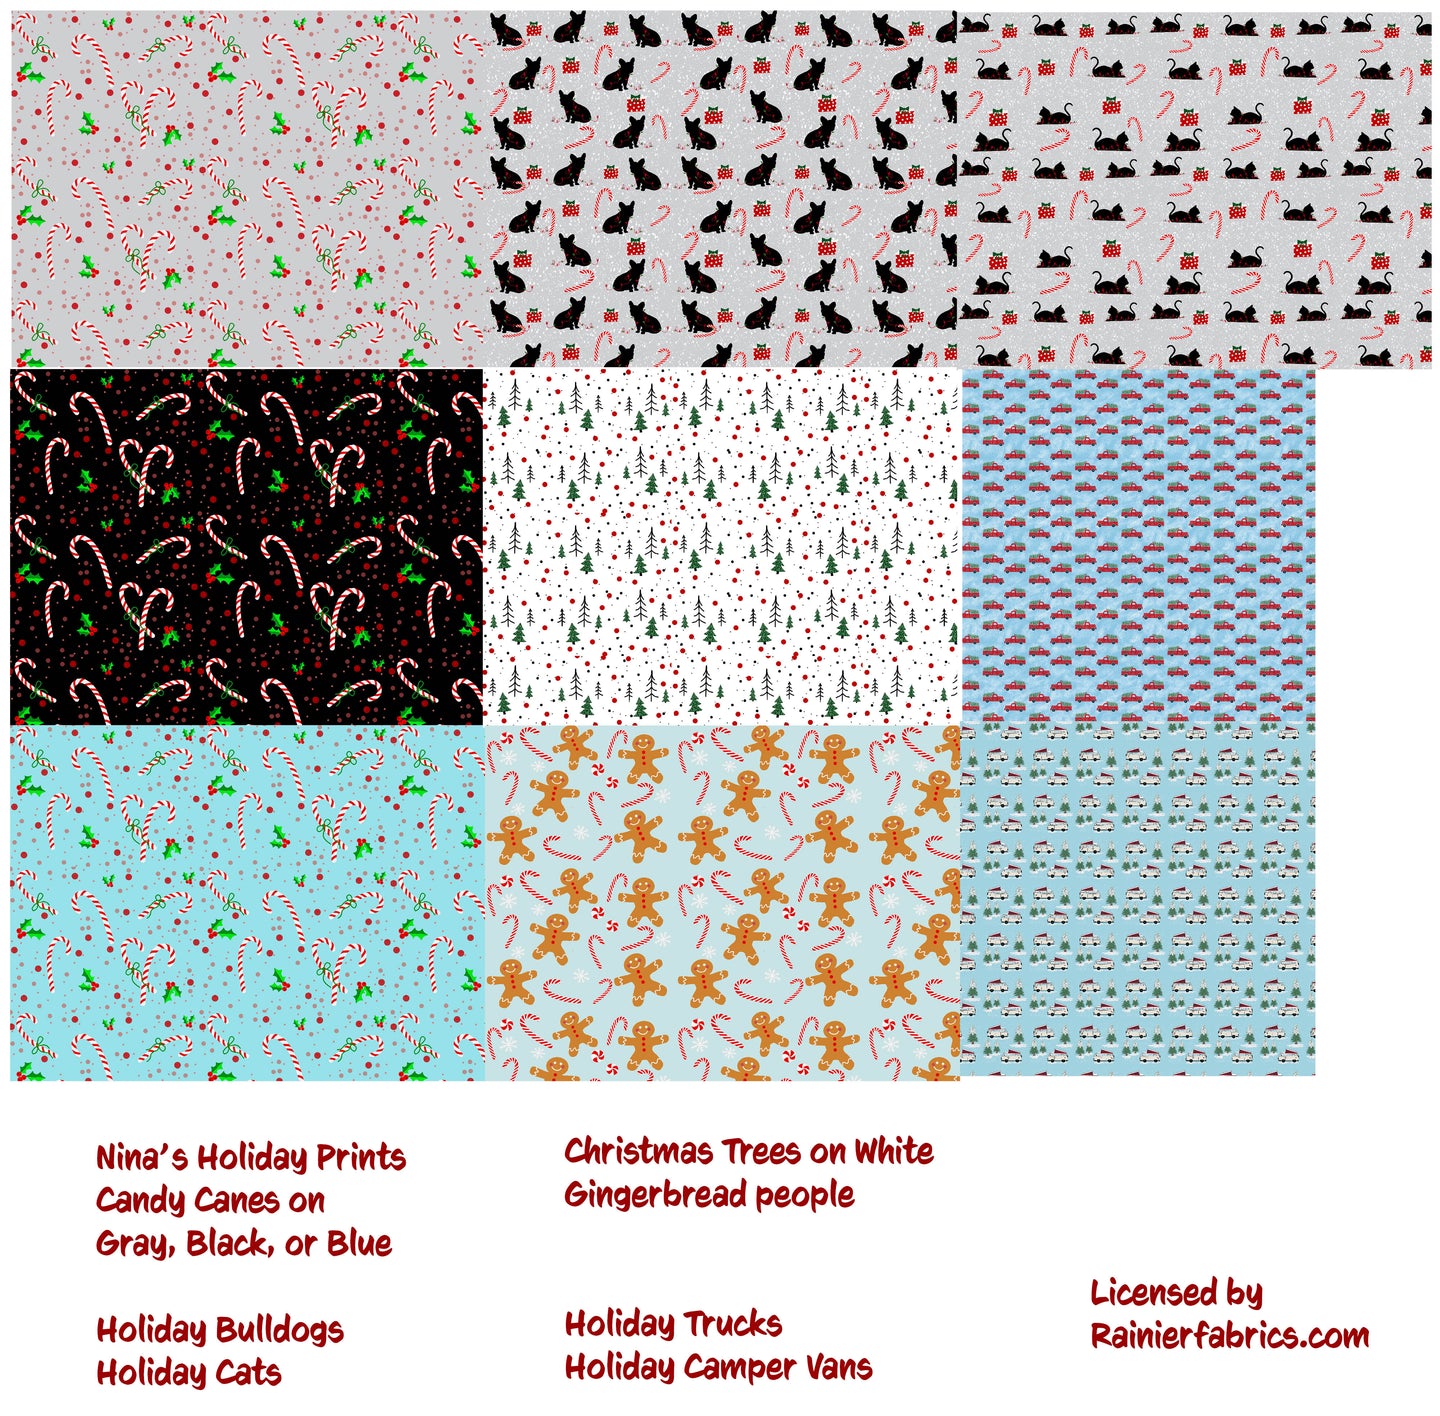 More Holiday and Christmas Prints - from Nina  - 2-5 day turnaround - Order by 1/2 yard; Description of bases below